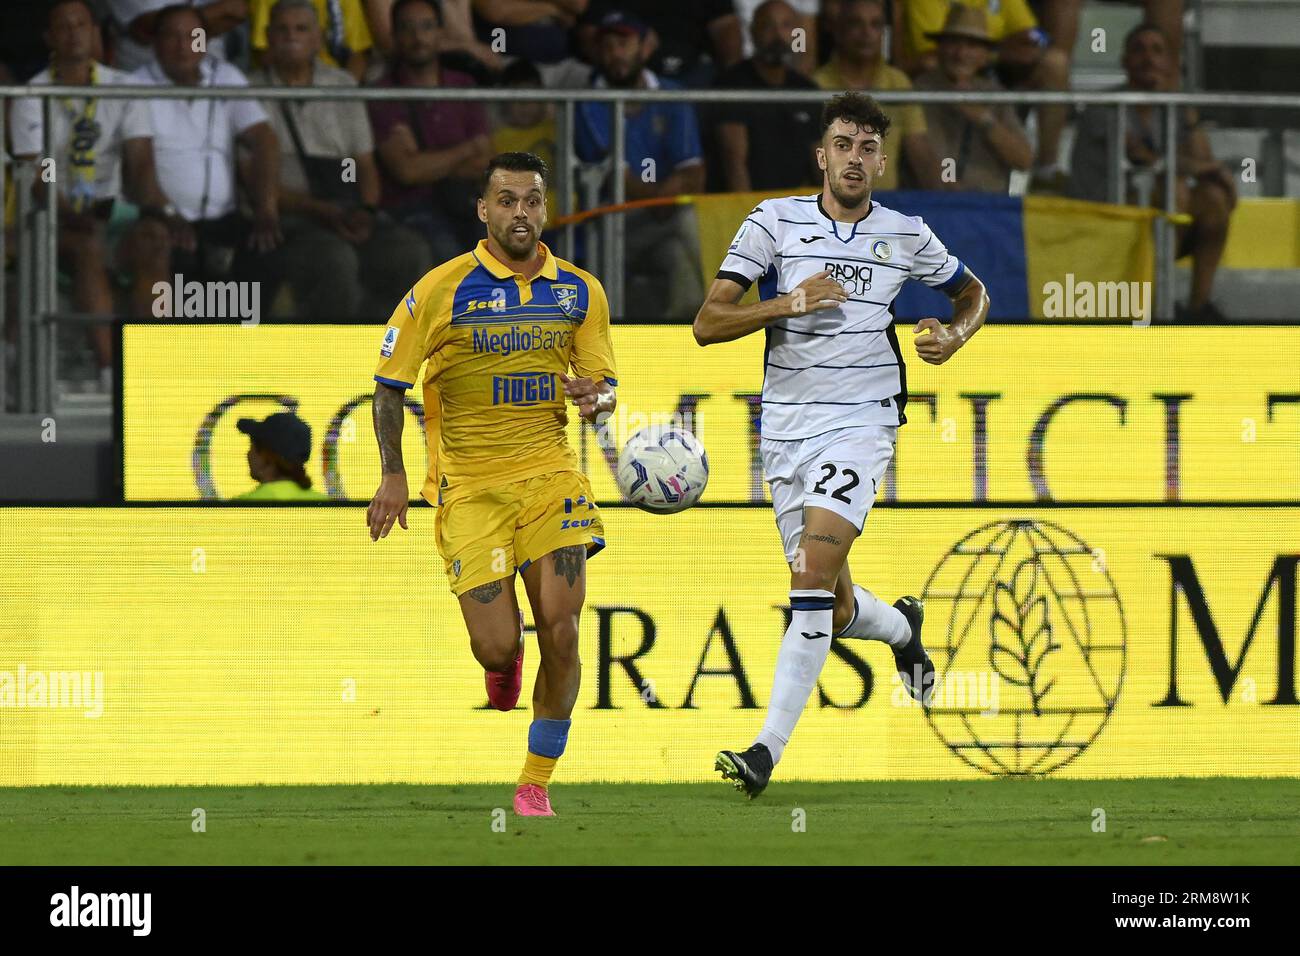 Frosinone, Italy. 26th Aug, 2023. Francesco Gelli of Frosinone Calcio and Matteo Ruggeri of Atalanta during the 2nd matchday of Serie A between Frosinone Calcio - Atalanta Bergamasca Calcio on August 26, 2023 at Benito Stirpe Stadium in Frosinone, Italy. Credit: Independent Photo Agency/Alamy Live News Stock Photo